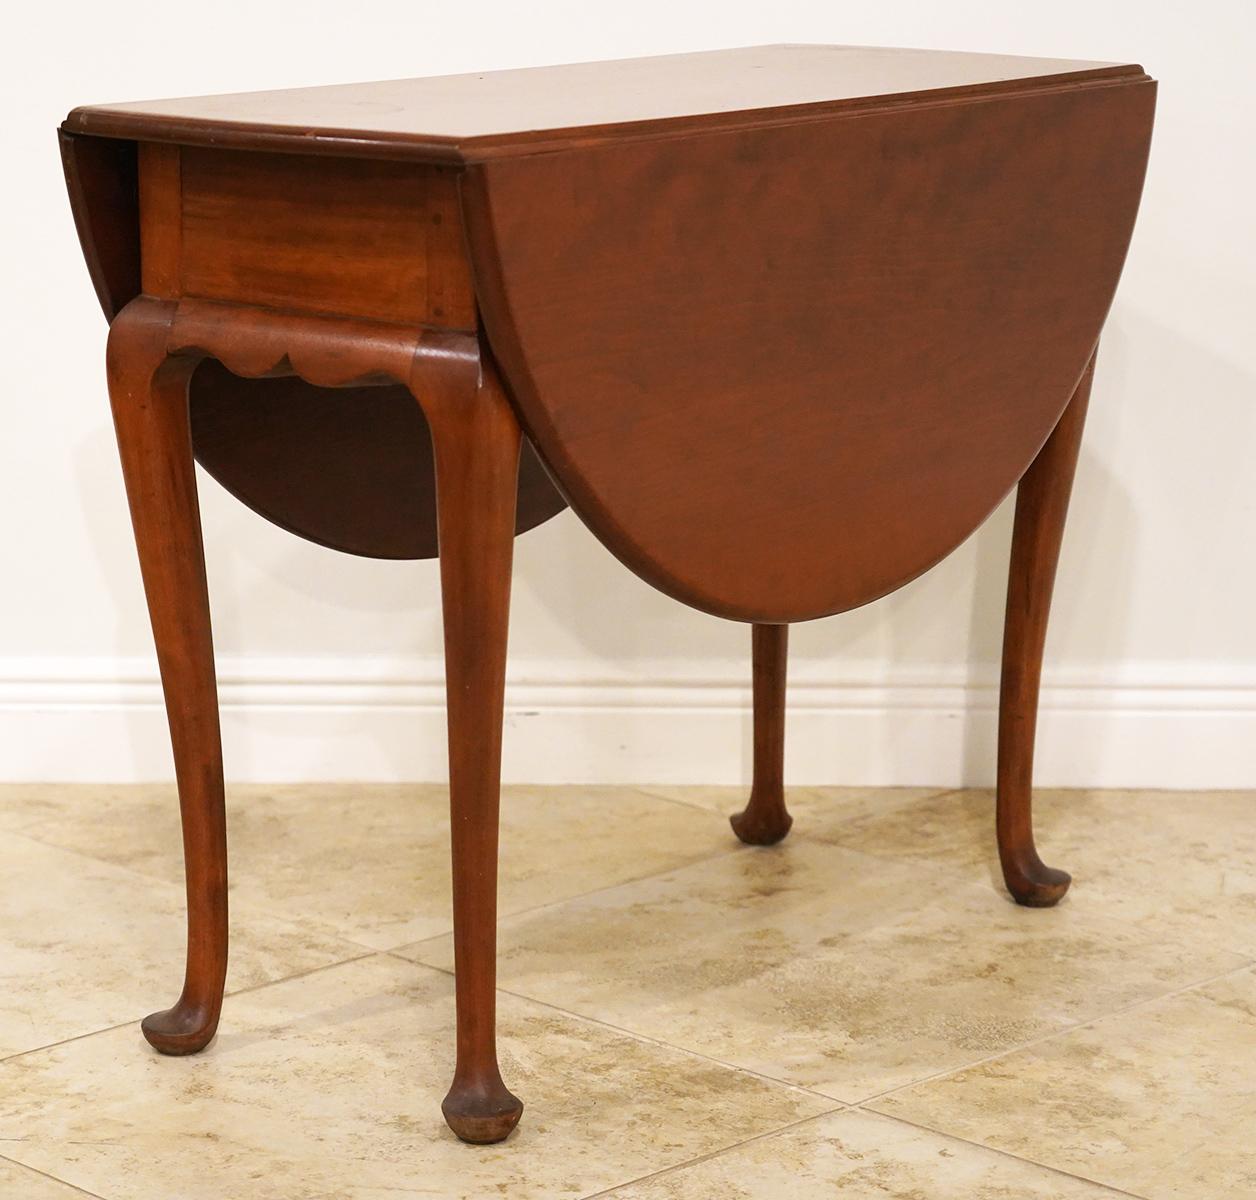 This fine New England Queen Anne Style drop-leaf table is made of high quality cherrywood of great color with one plank top and leaves. Two legs swing out to support the leaves when open. The skirts at both ends are beautifully carved and shaped.